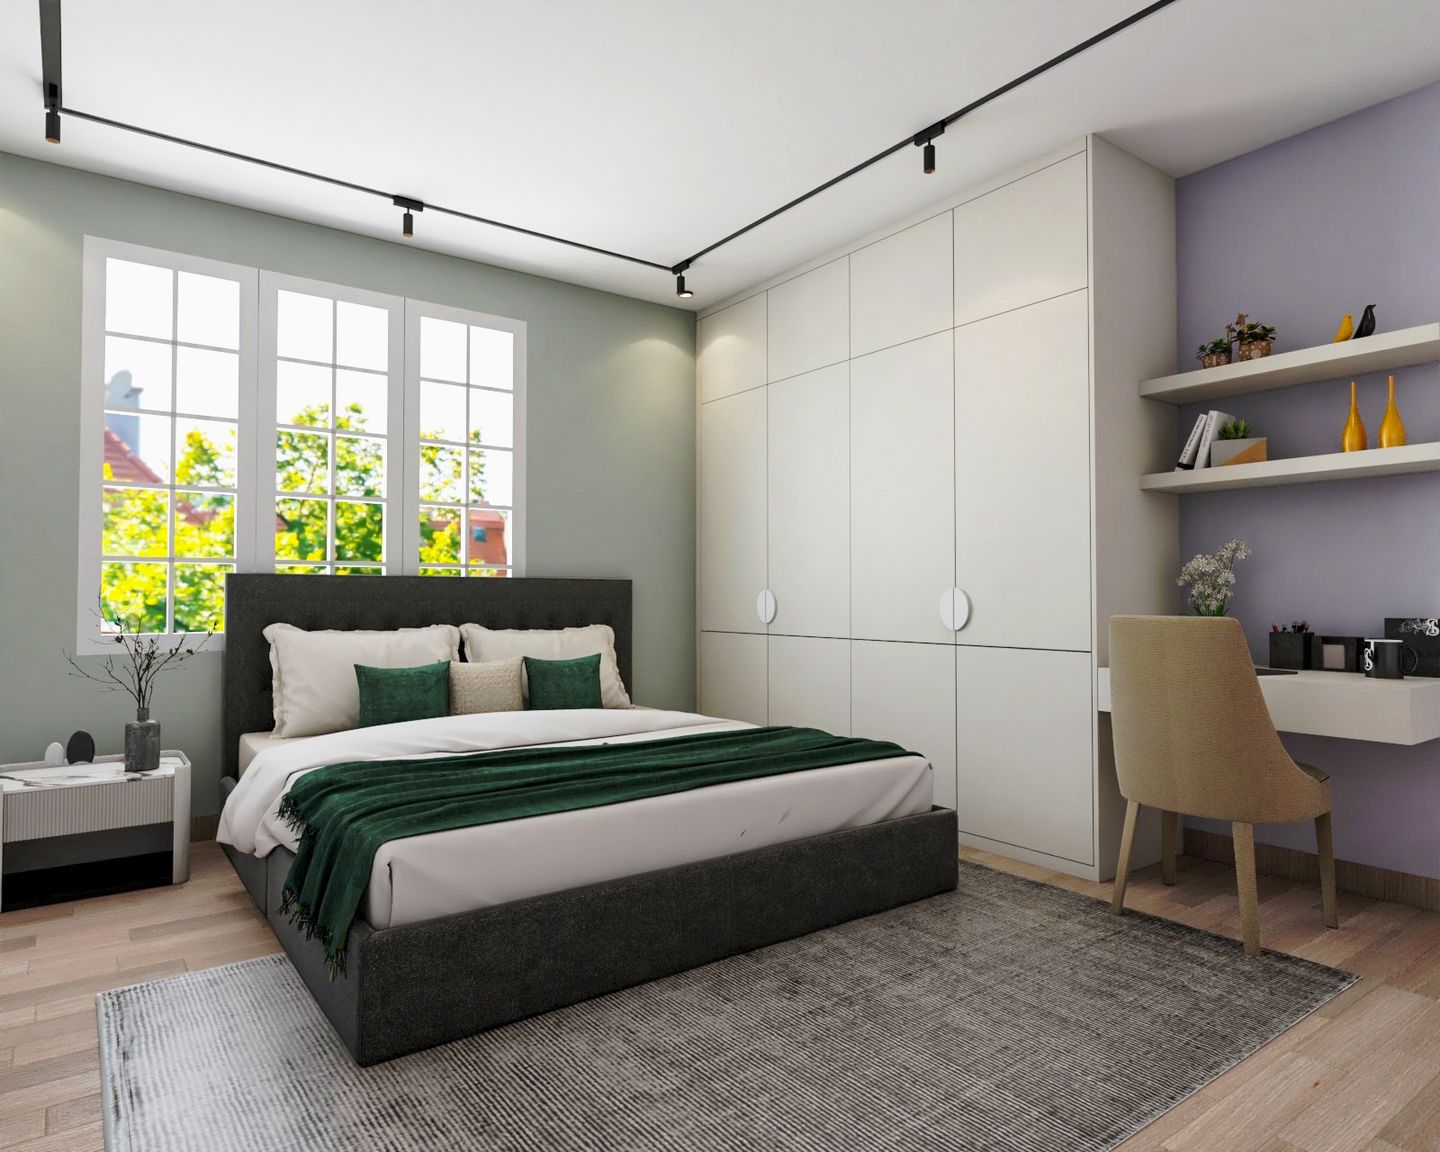 Modern Light Green And Lavender Solid Wall Paint Colours For Bedrooms - Livspace